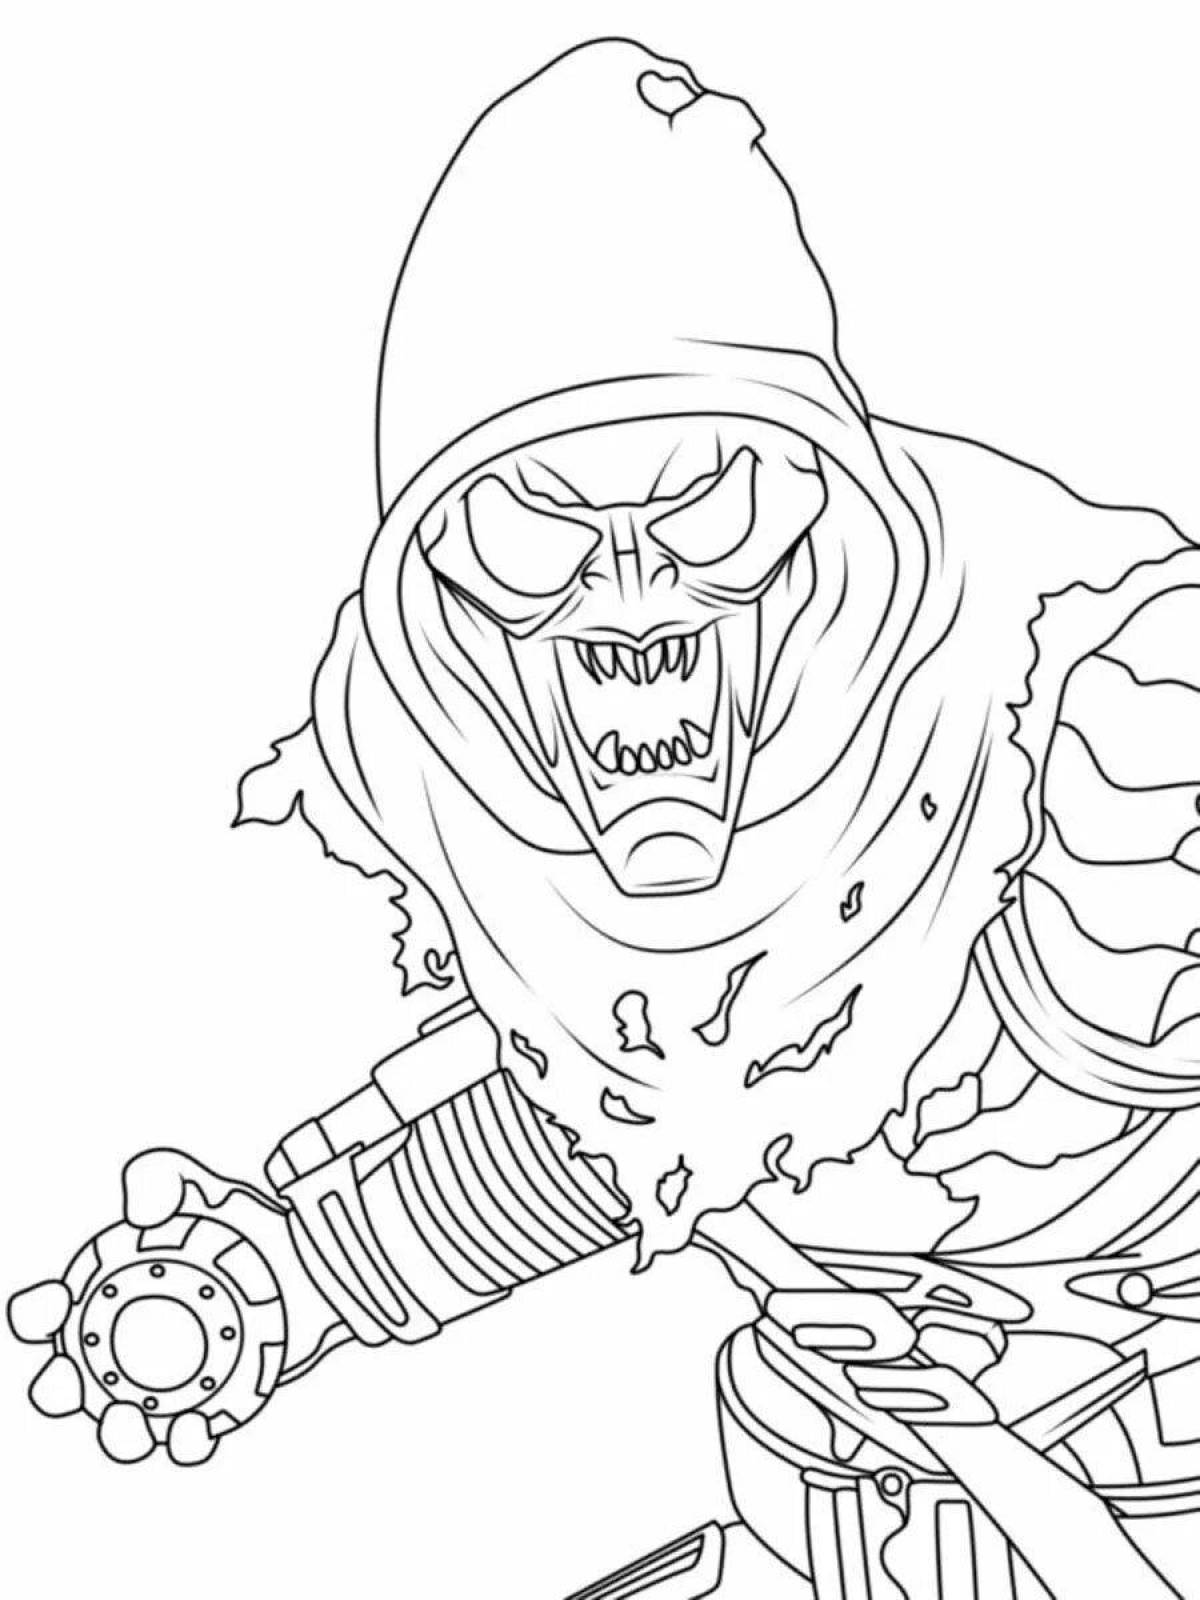 Improved goblin core coloring page